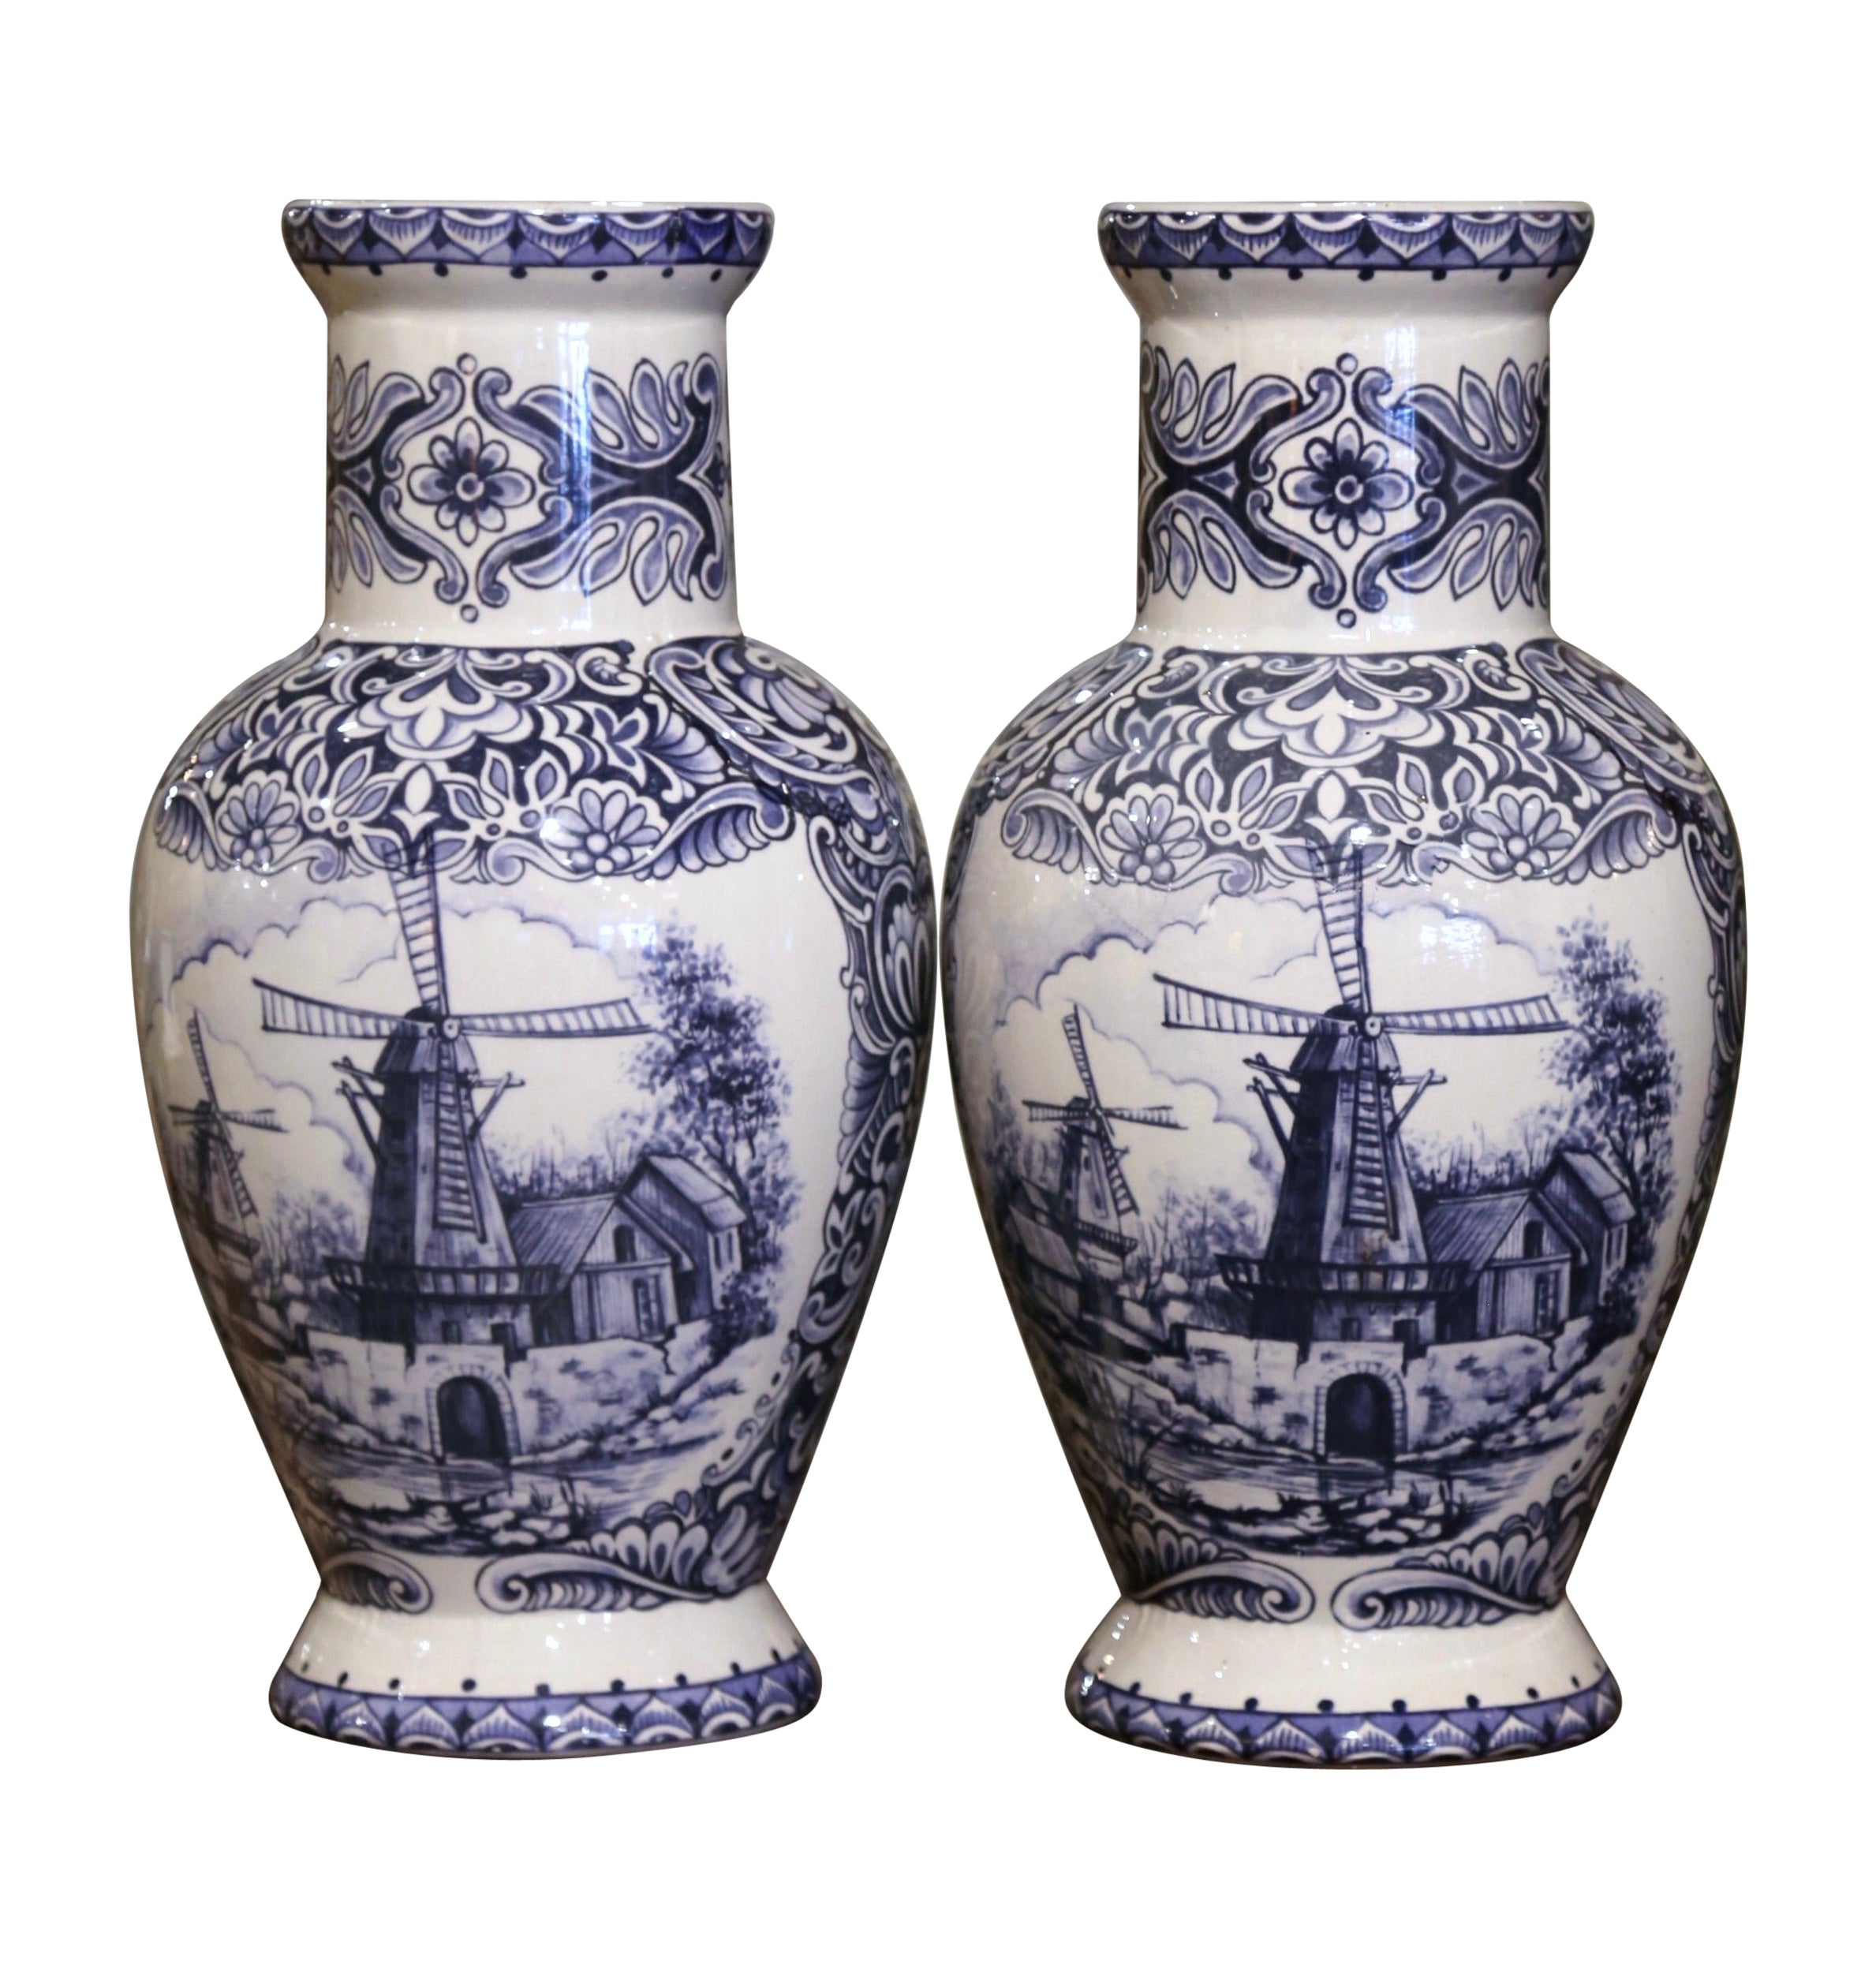 Pair of Early 20th Century Dutch Blue and White Hand Painted Faience Delft Vases